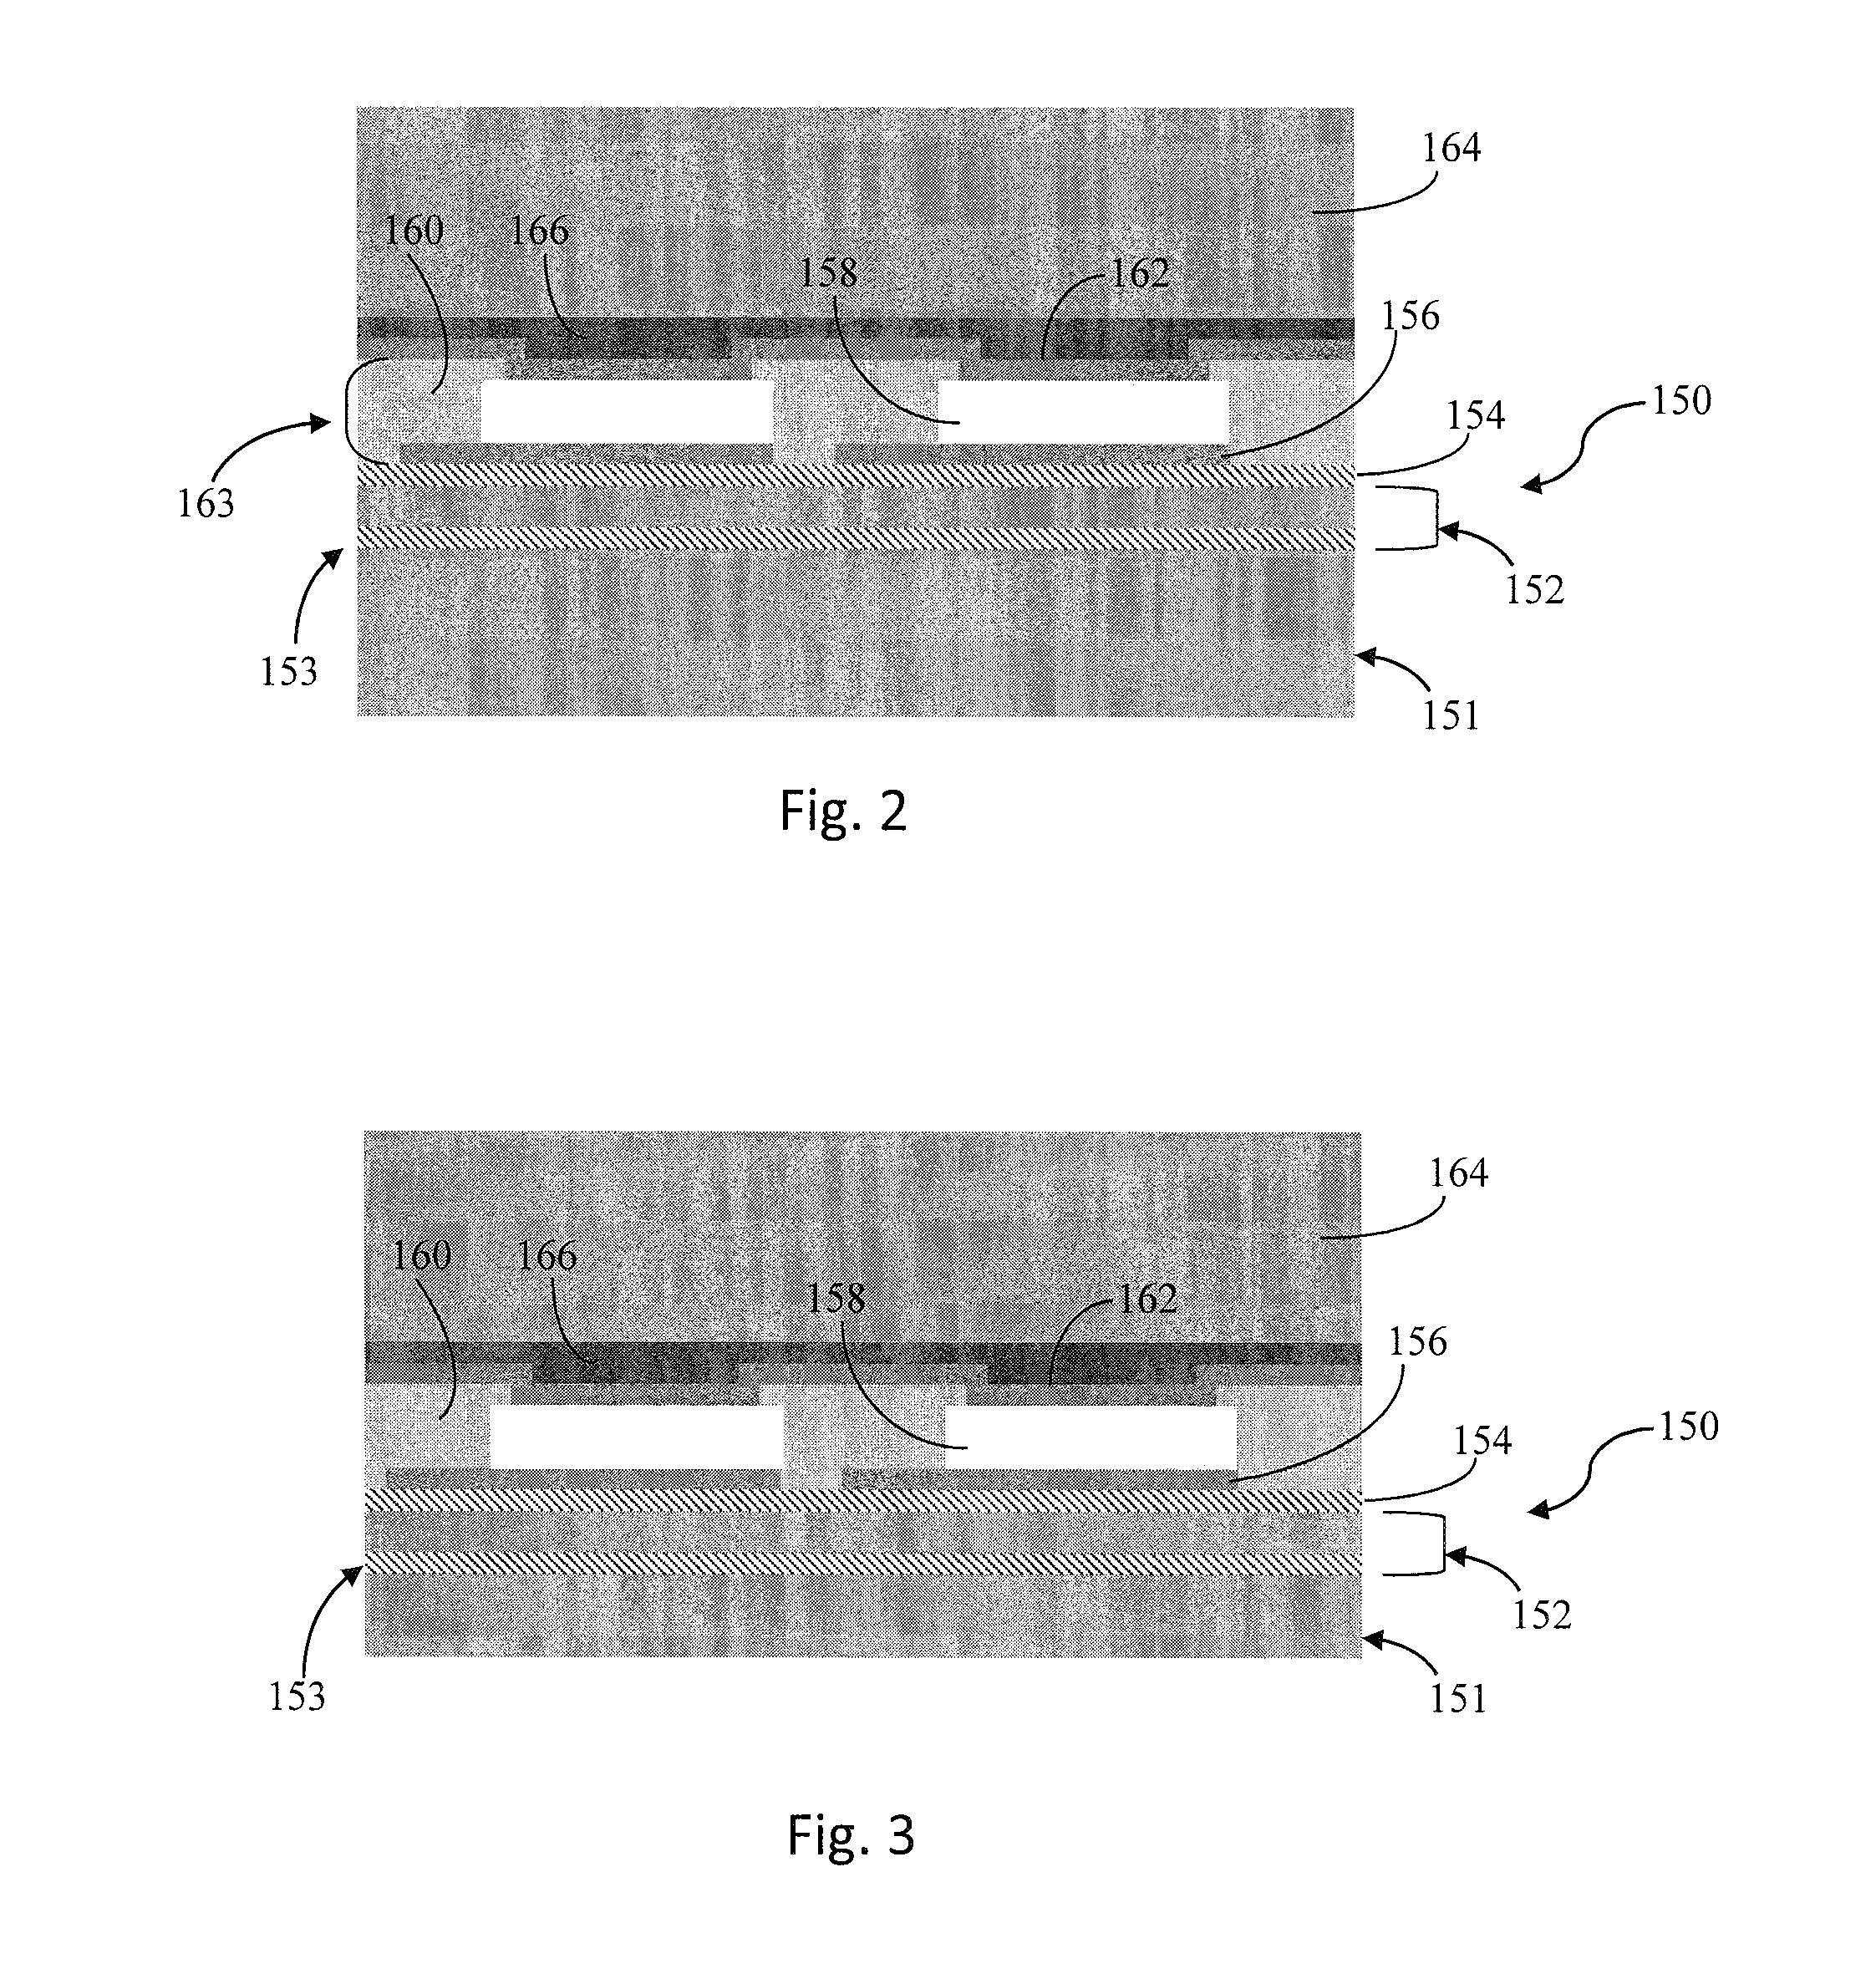 Method for forming an ultrasonic transducer, and associated apparatus